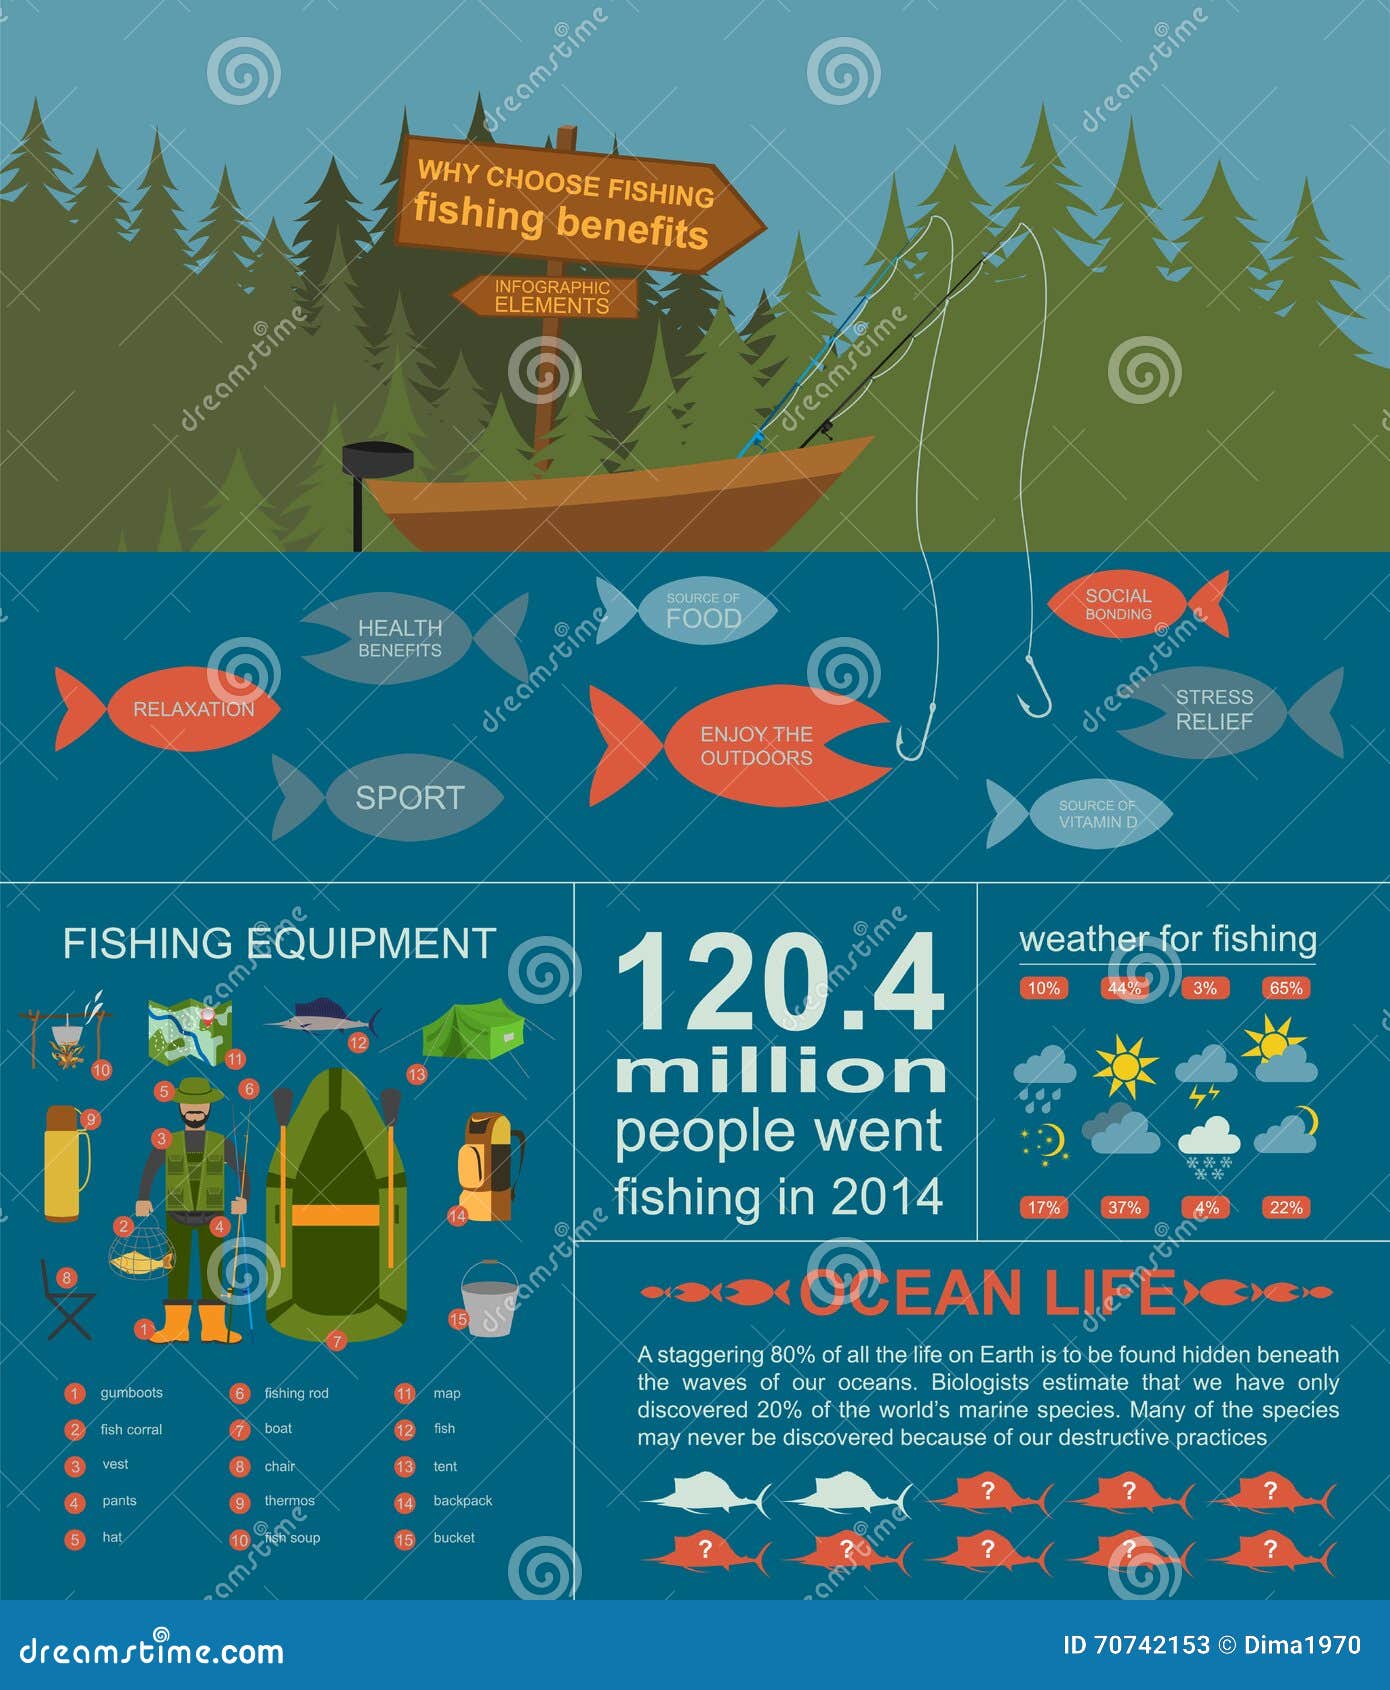 Fishing Infographic Elements, Fishing Benefits And 